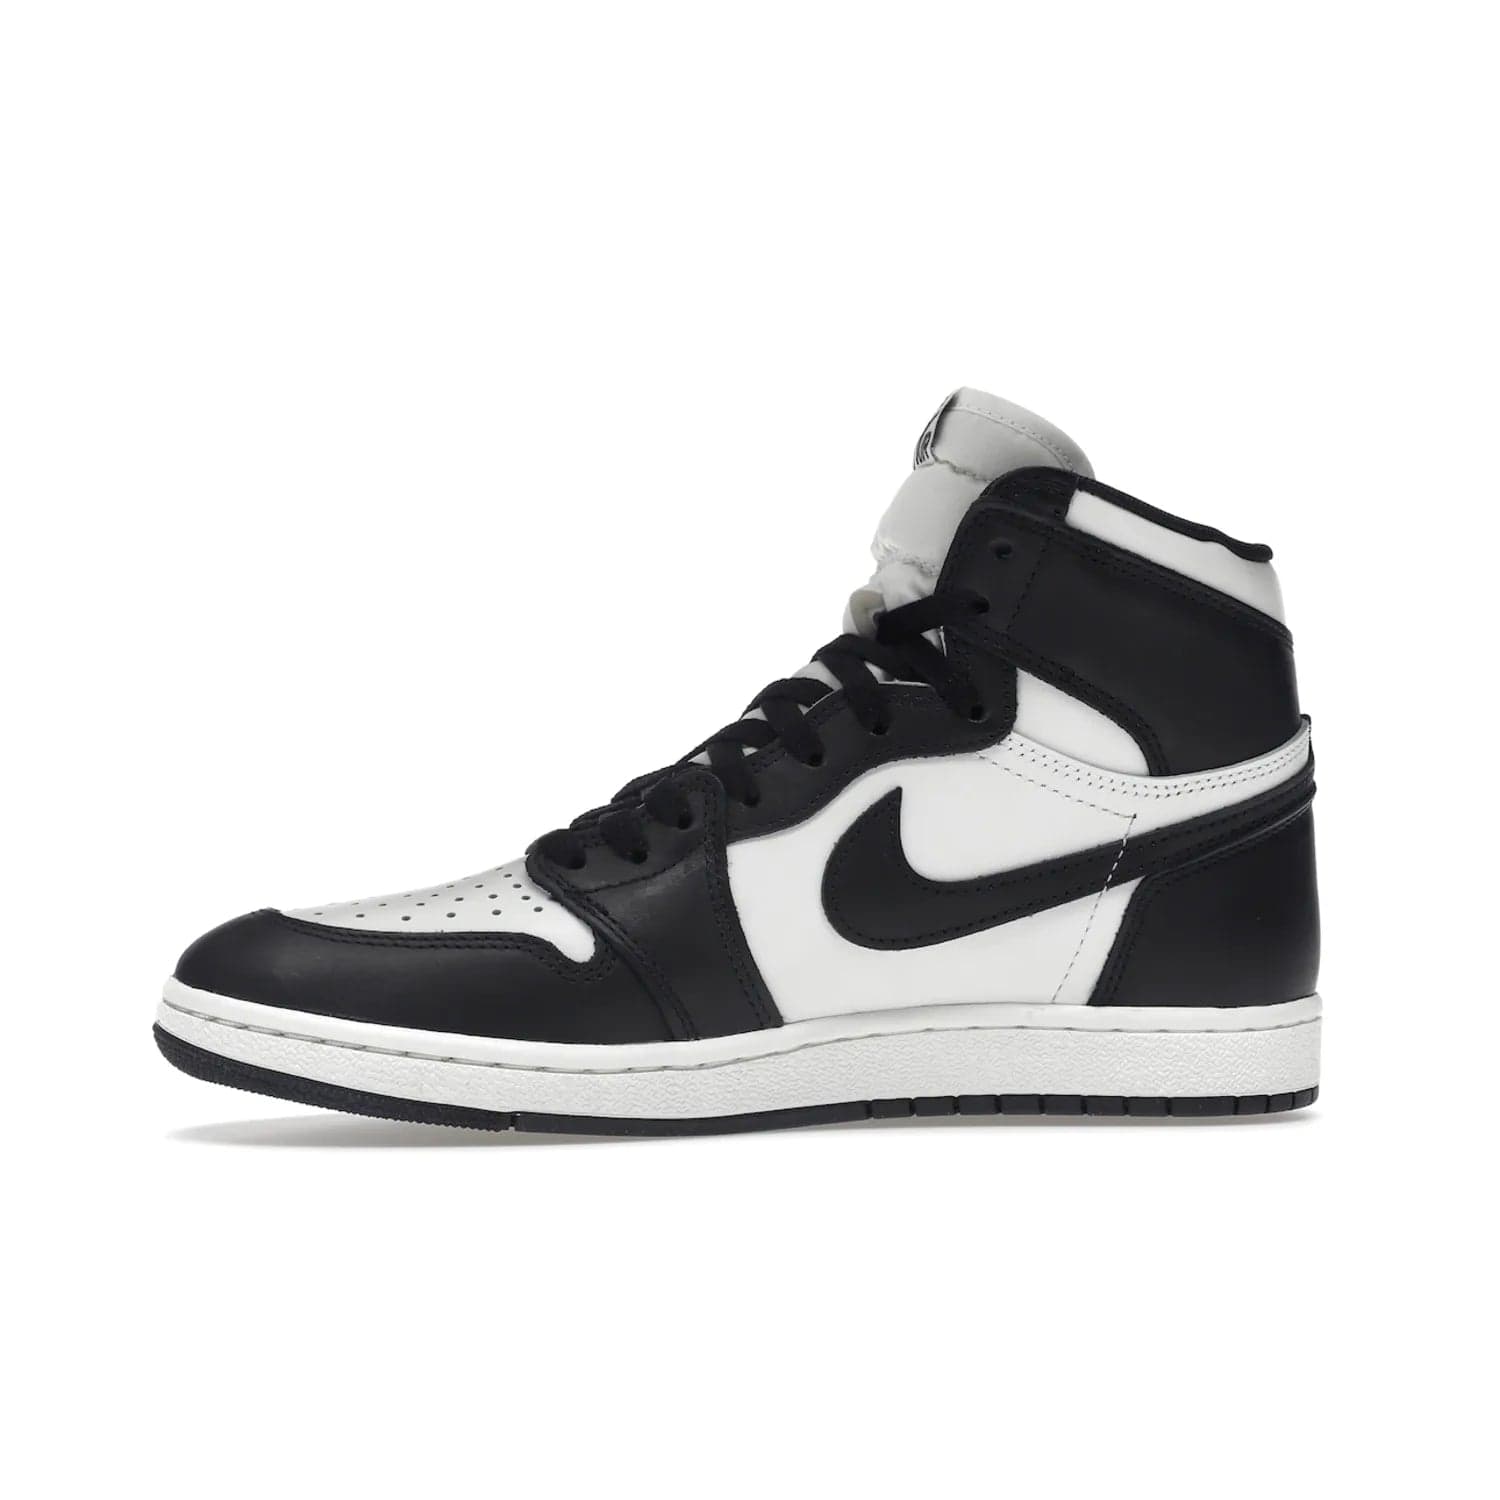 Jordan 1 Retro High 85 Black White (2023) - Image 18 - Only at www.BallersClubKickz.com - Brand new Jordan 1 Retro High 85 Black White (2023) now available. A classic color scheme of black and white leather uppers with signature Nike Air logo on the tongue. Must-have for any Air Jordan fan. Available February 15, 2023.